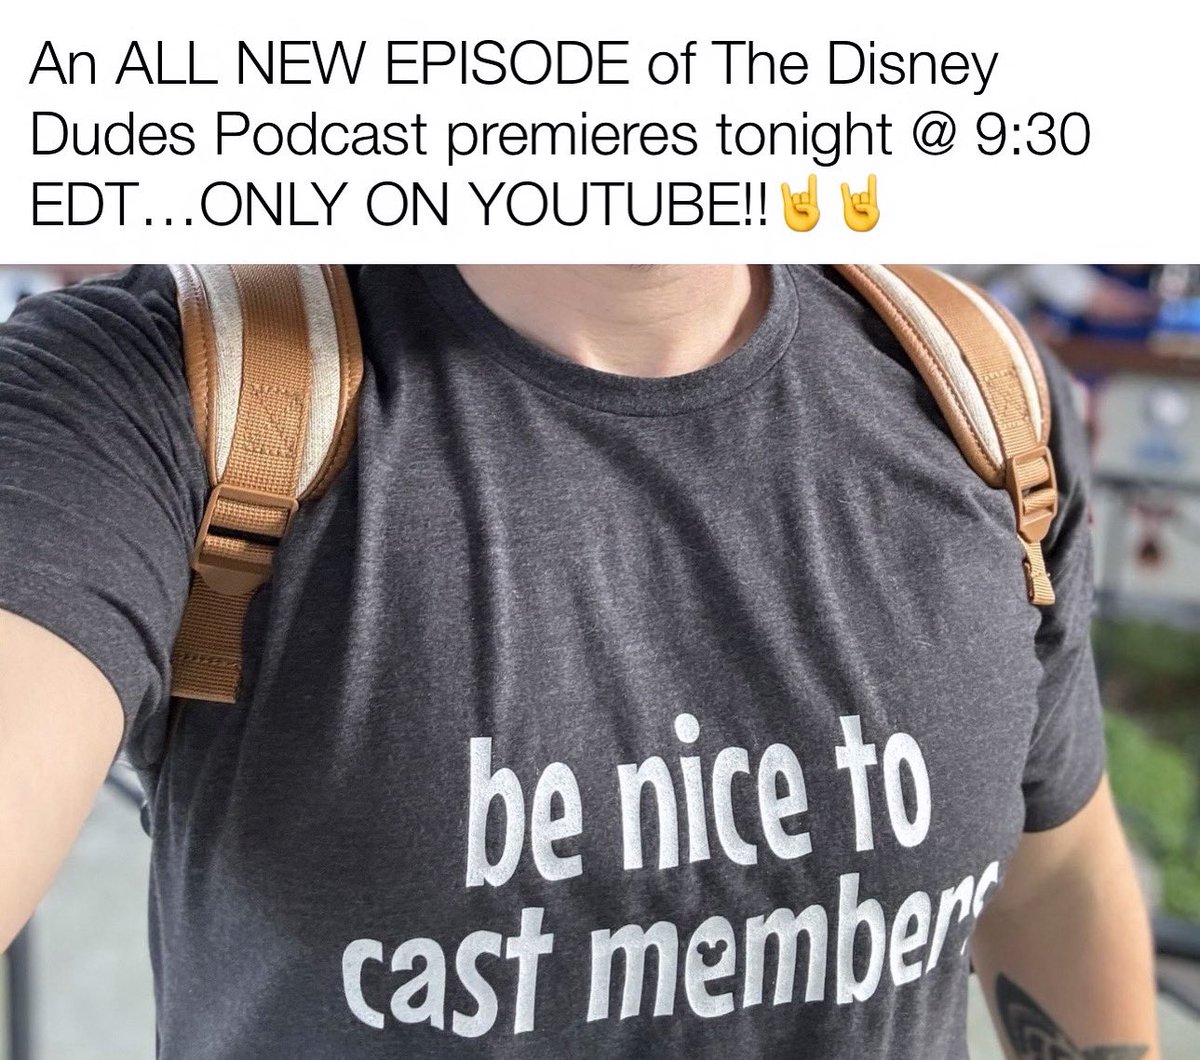 🙌DON’T FORGET THAT AN ALL NEW EPISODE PREMIERES TONIGHT @ 9:30 ONLY ON YOUTUBE!

So, follow the link in our BIO or STORY to WATCH OUR LATEST & GREATEST!!👀👀

#thedisneydudespodcast #benicetocastmembers #castmemberlife #disney100 #disney #waltdisneyworld #disneymeme